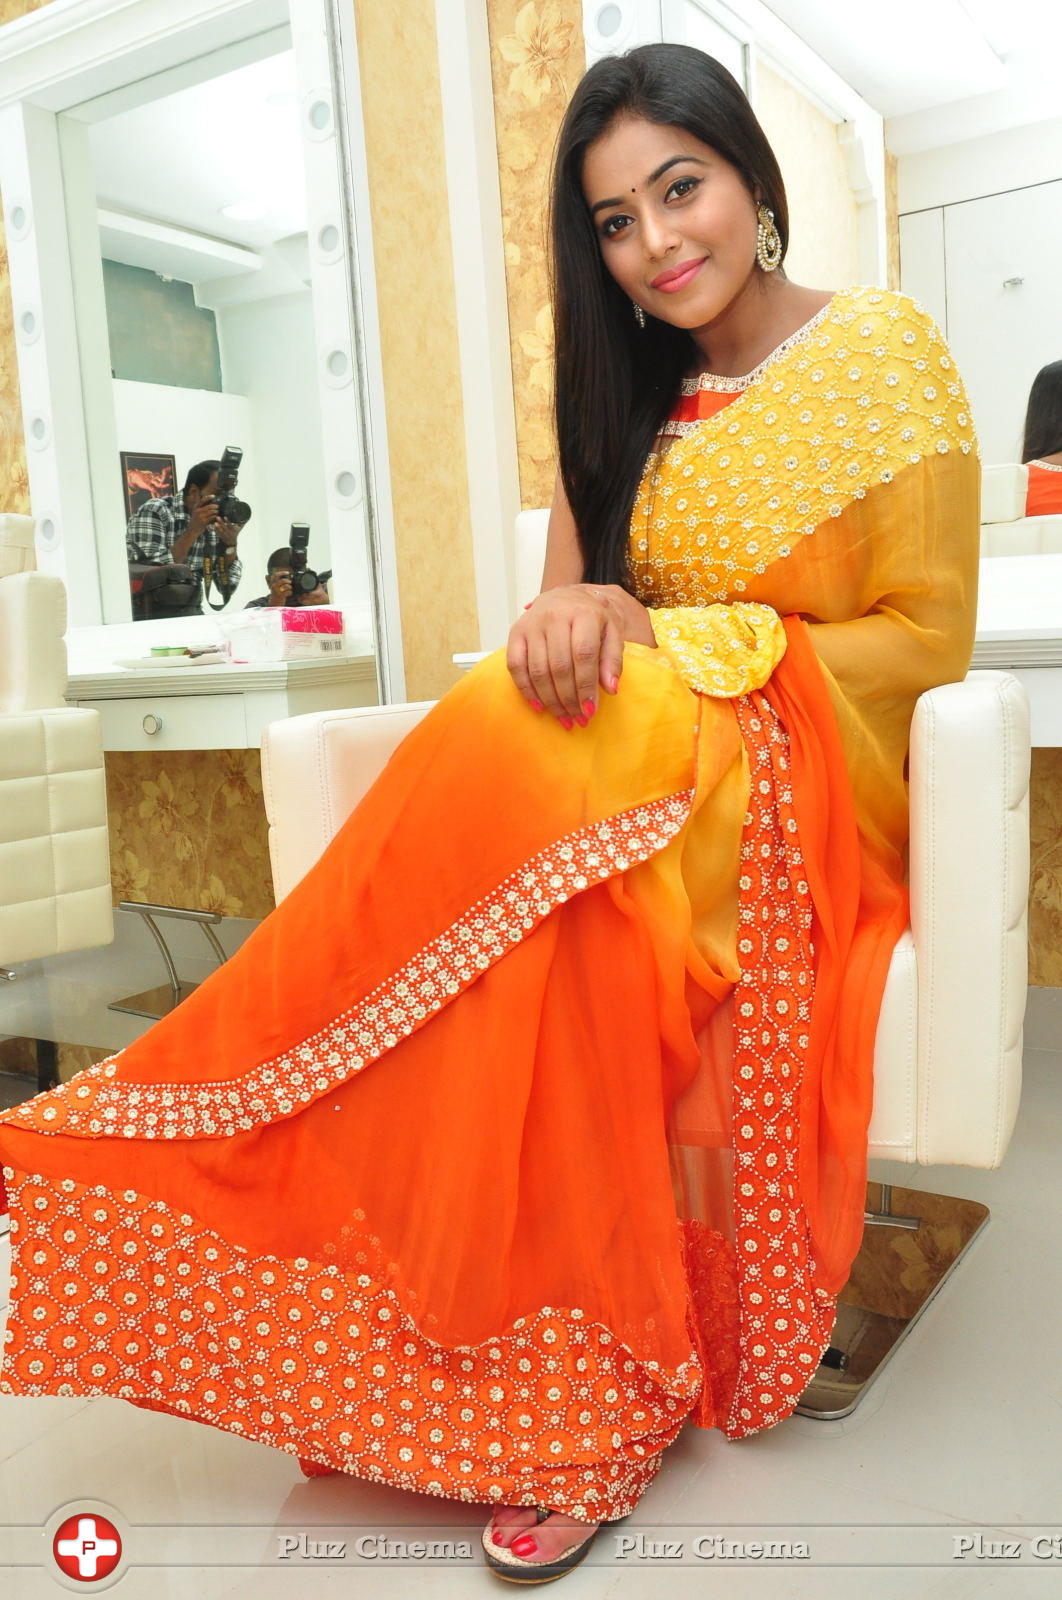 Poorna - Poorna Launches Naturals Beauty Salon Photos | Picture 1258859